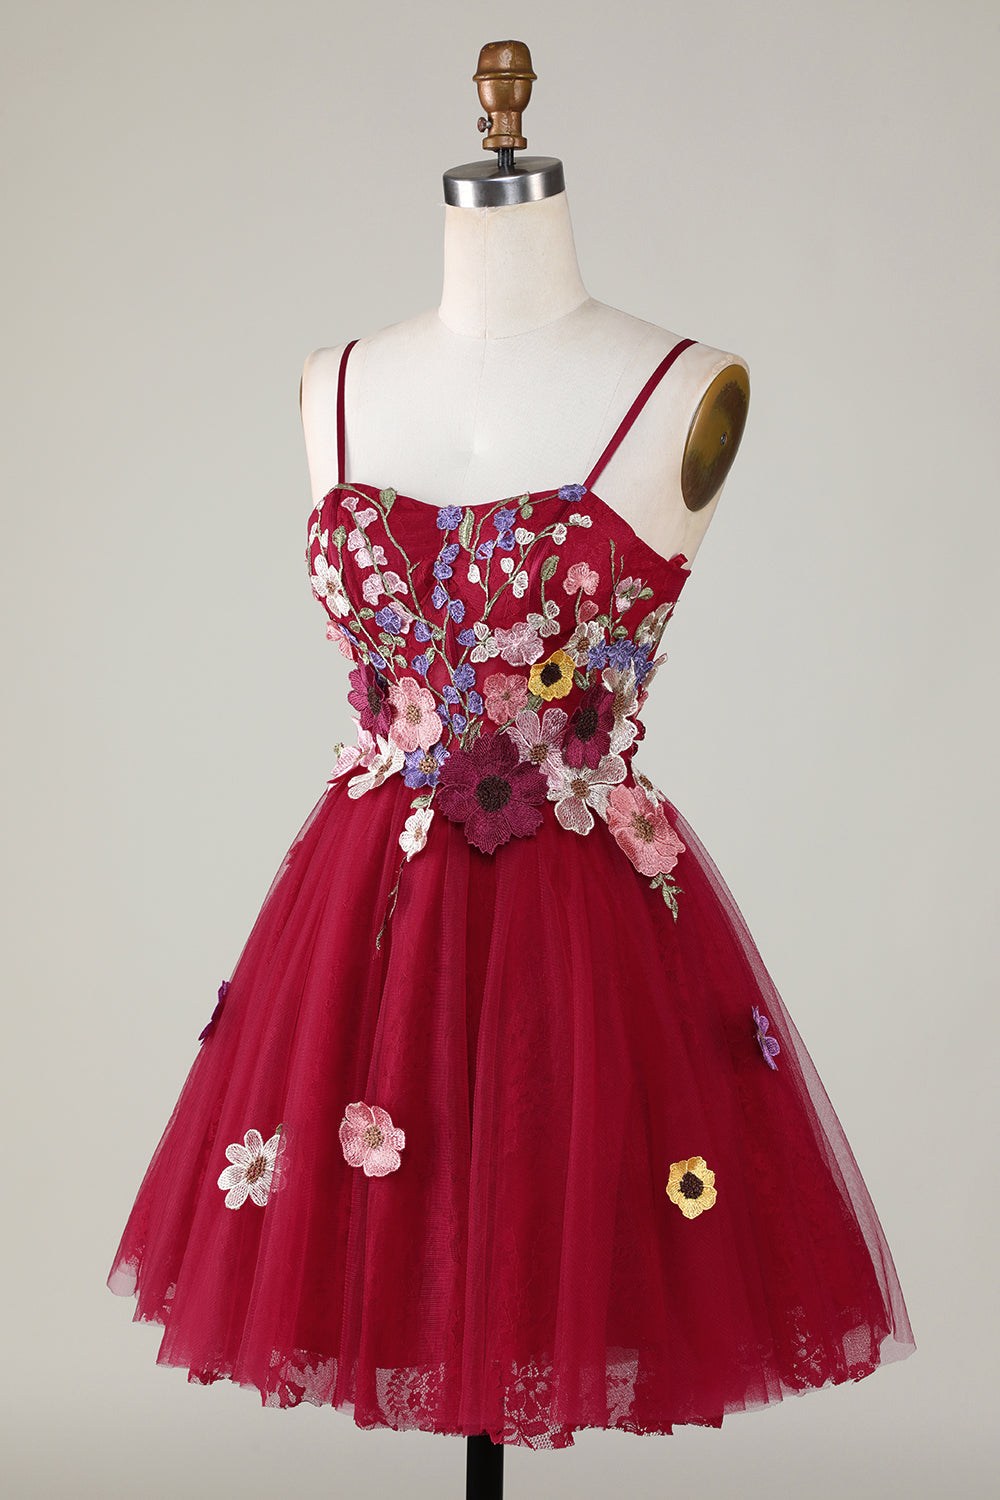 Burgundy A Line Spaghetti Straps Homecoming Dress With 3D Flowers